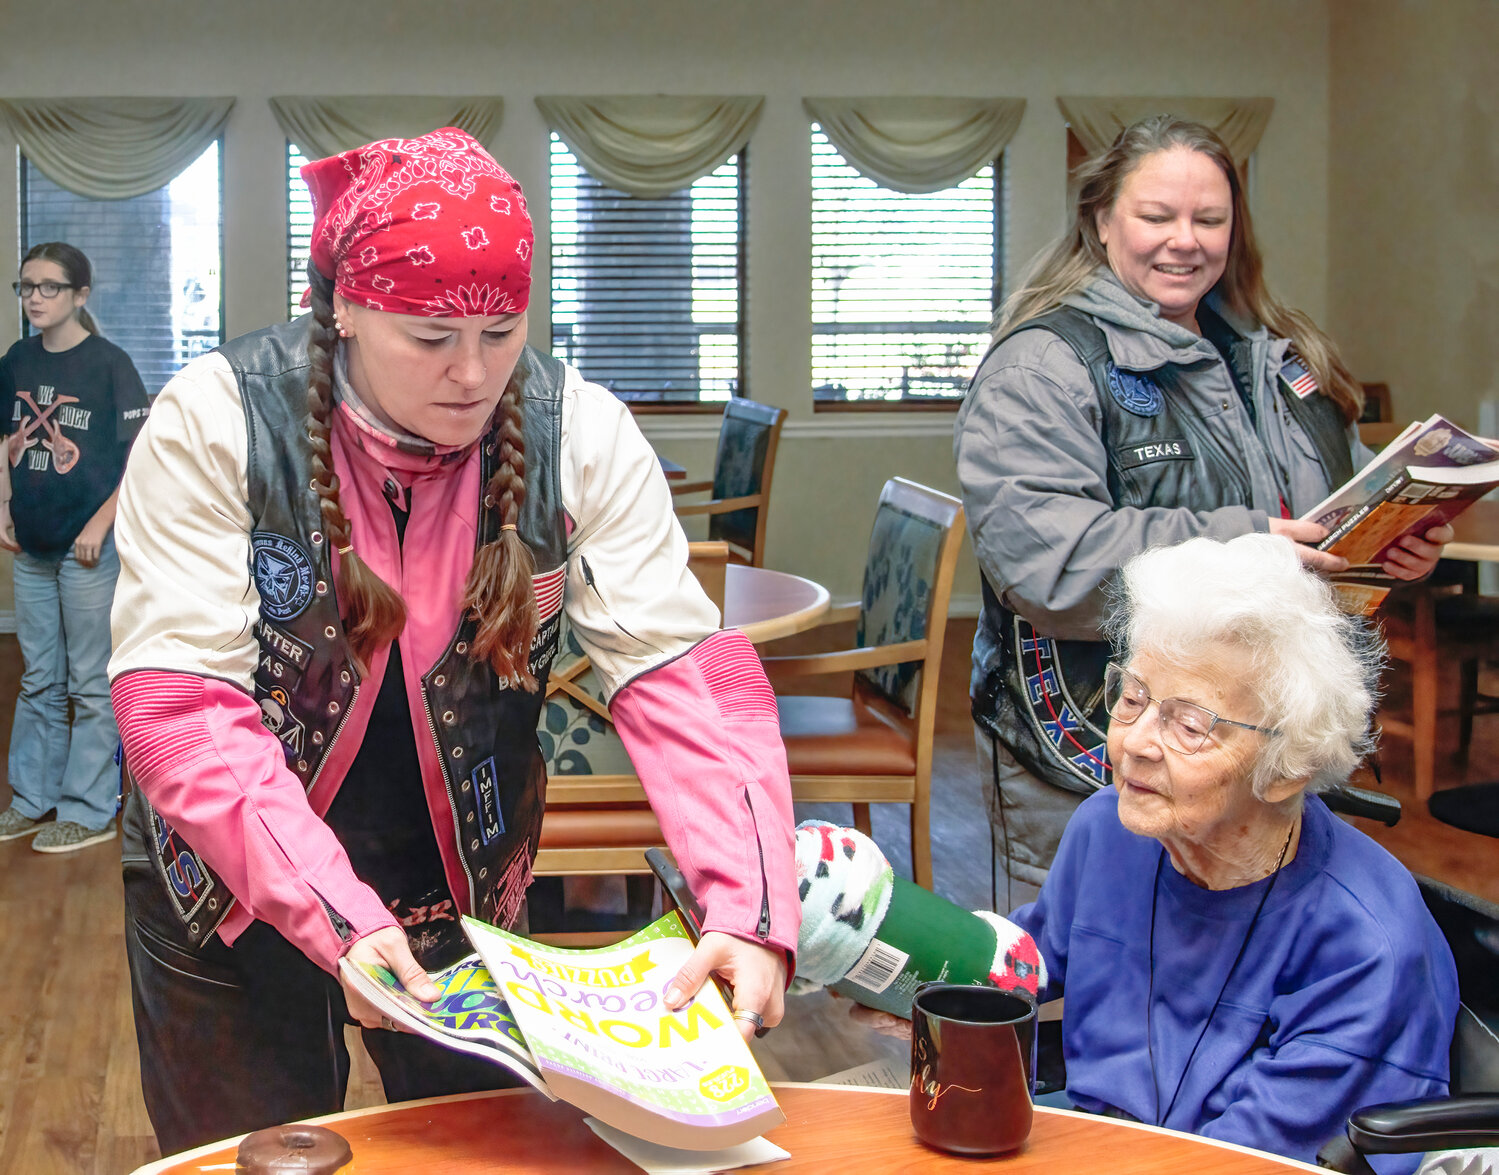 Every year, an all-female motorcycle club Iron Maidens donates coloring books, crossword puzzles, and other gifts to Hood County nursing homes residents and staff.